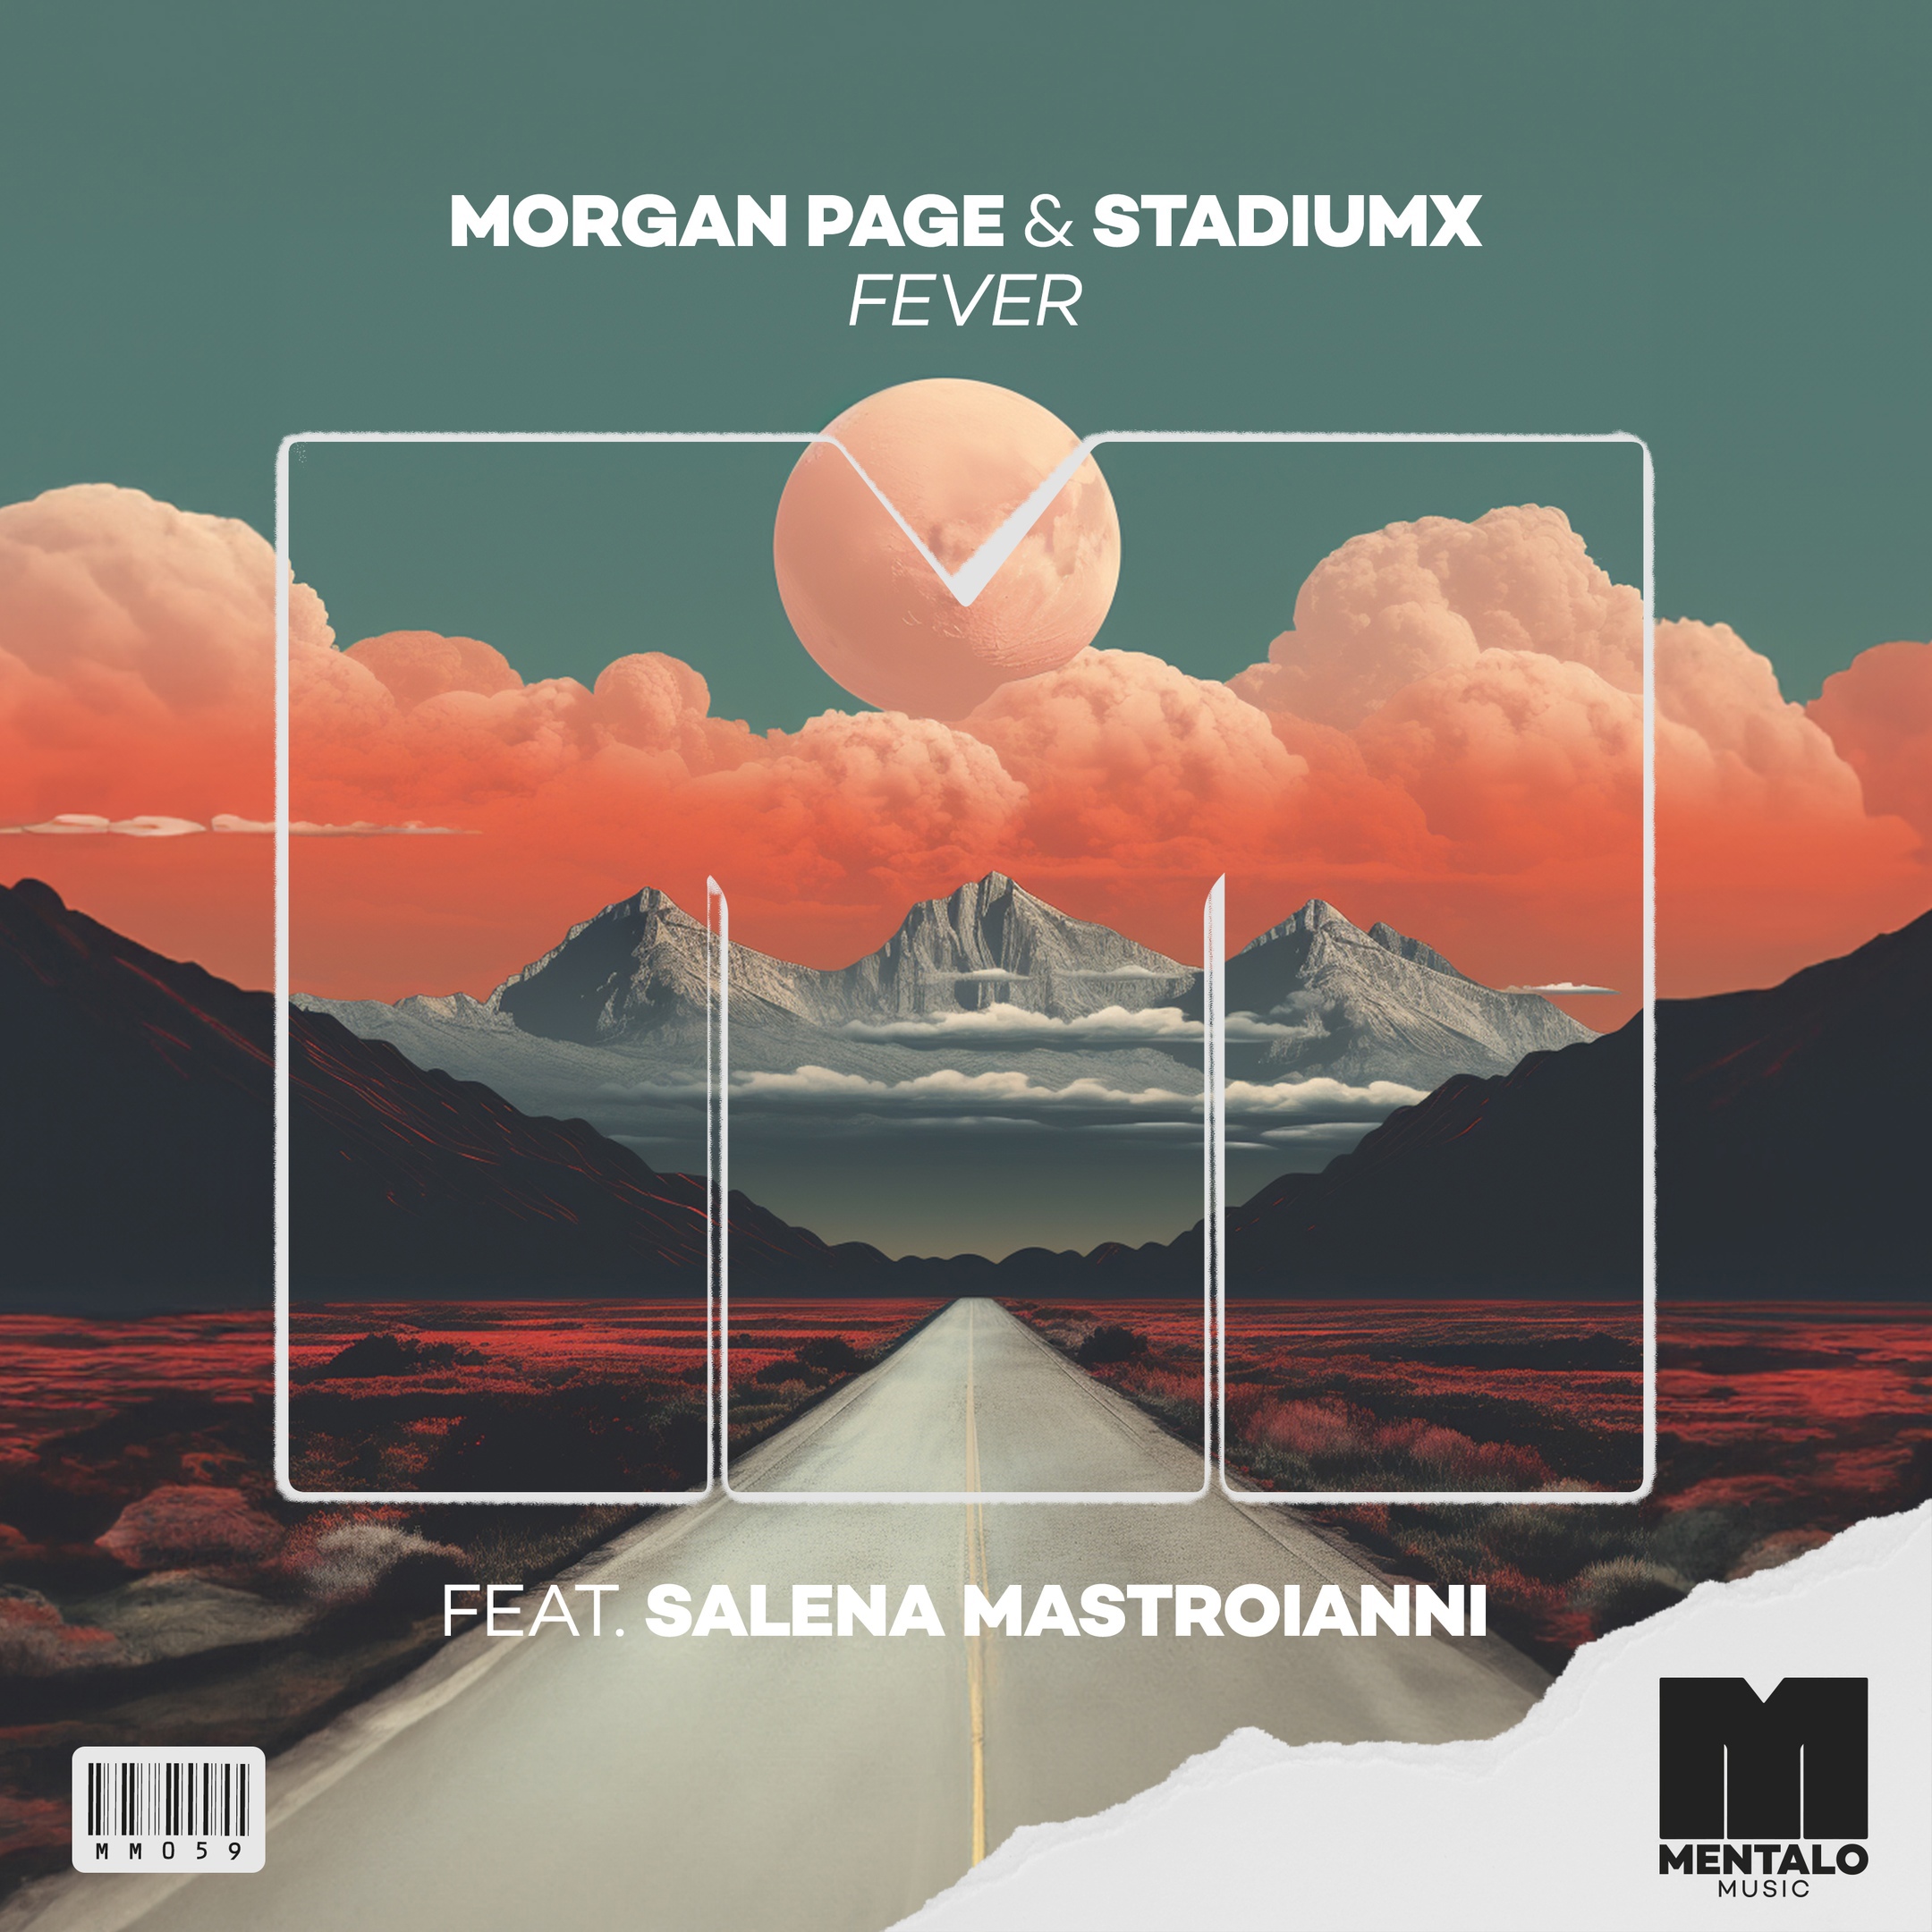 Morgan Page & Stadiumx feat. Salena Mastroianni - Fever (Extended Mix)